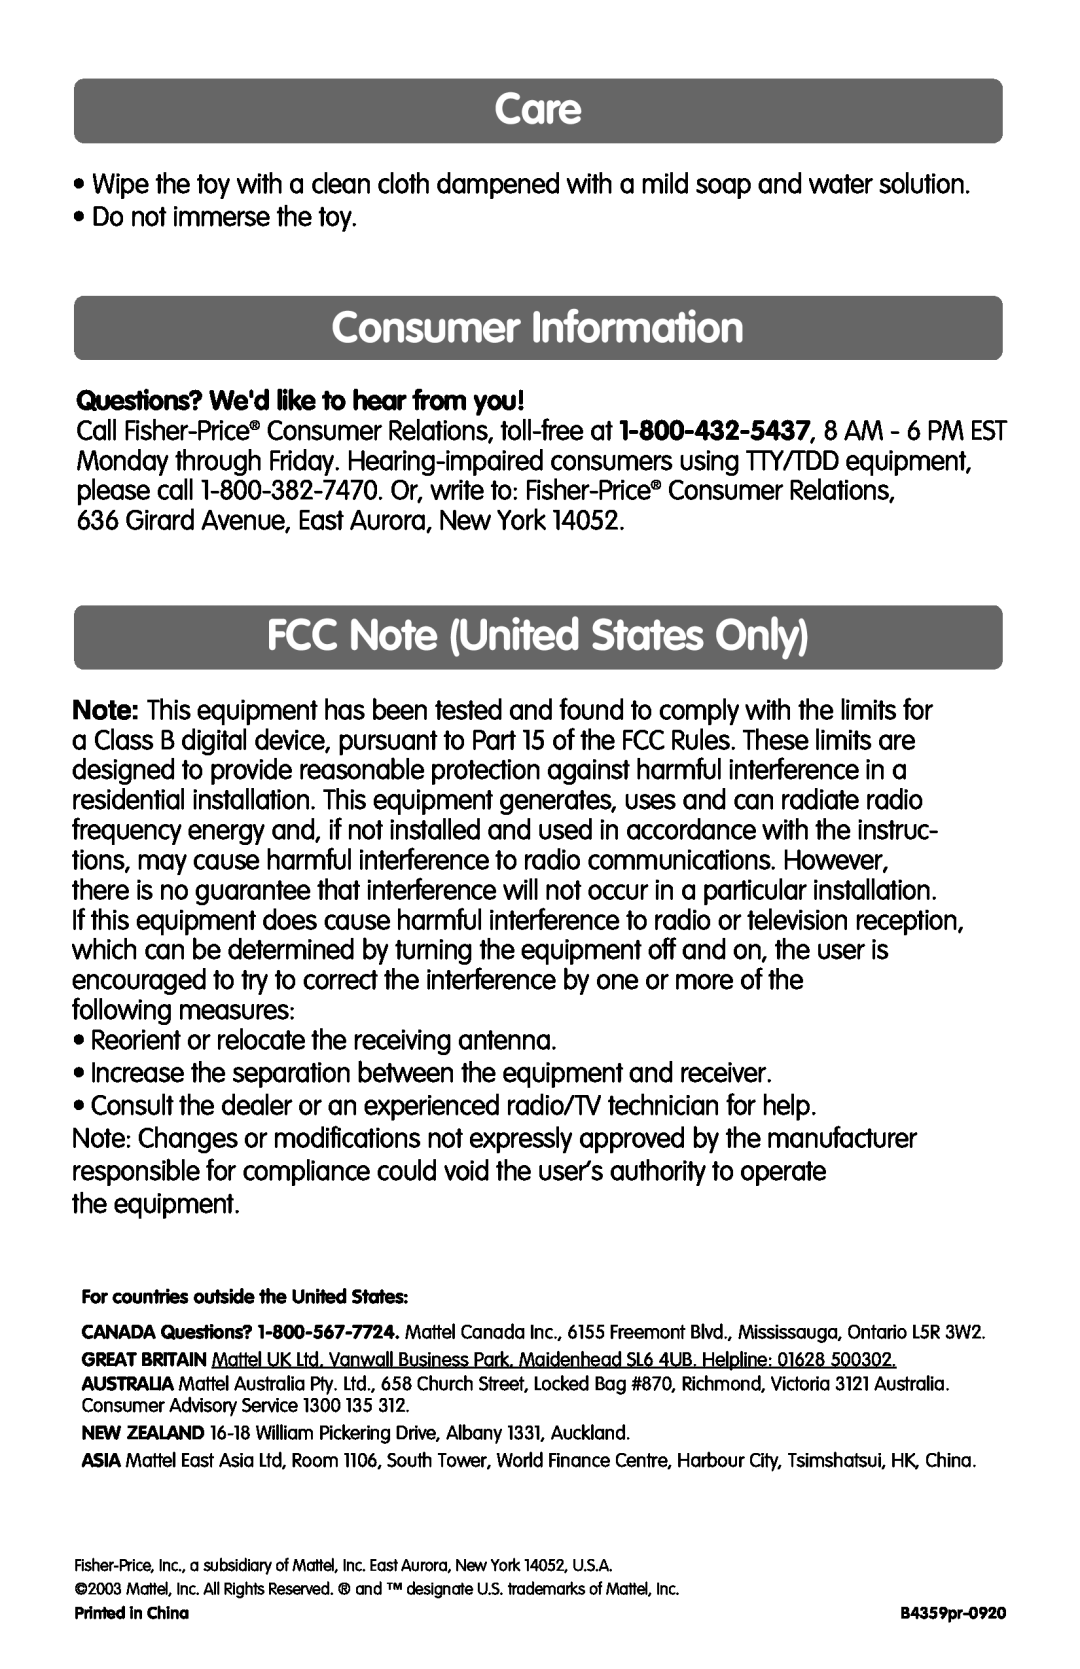 Fisher-Price B4359 Care, Consumer Information, FCC Note United States Only, Questions? Wed like to hear from you 